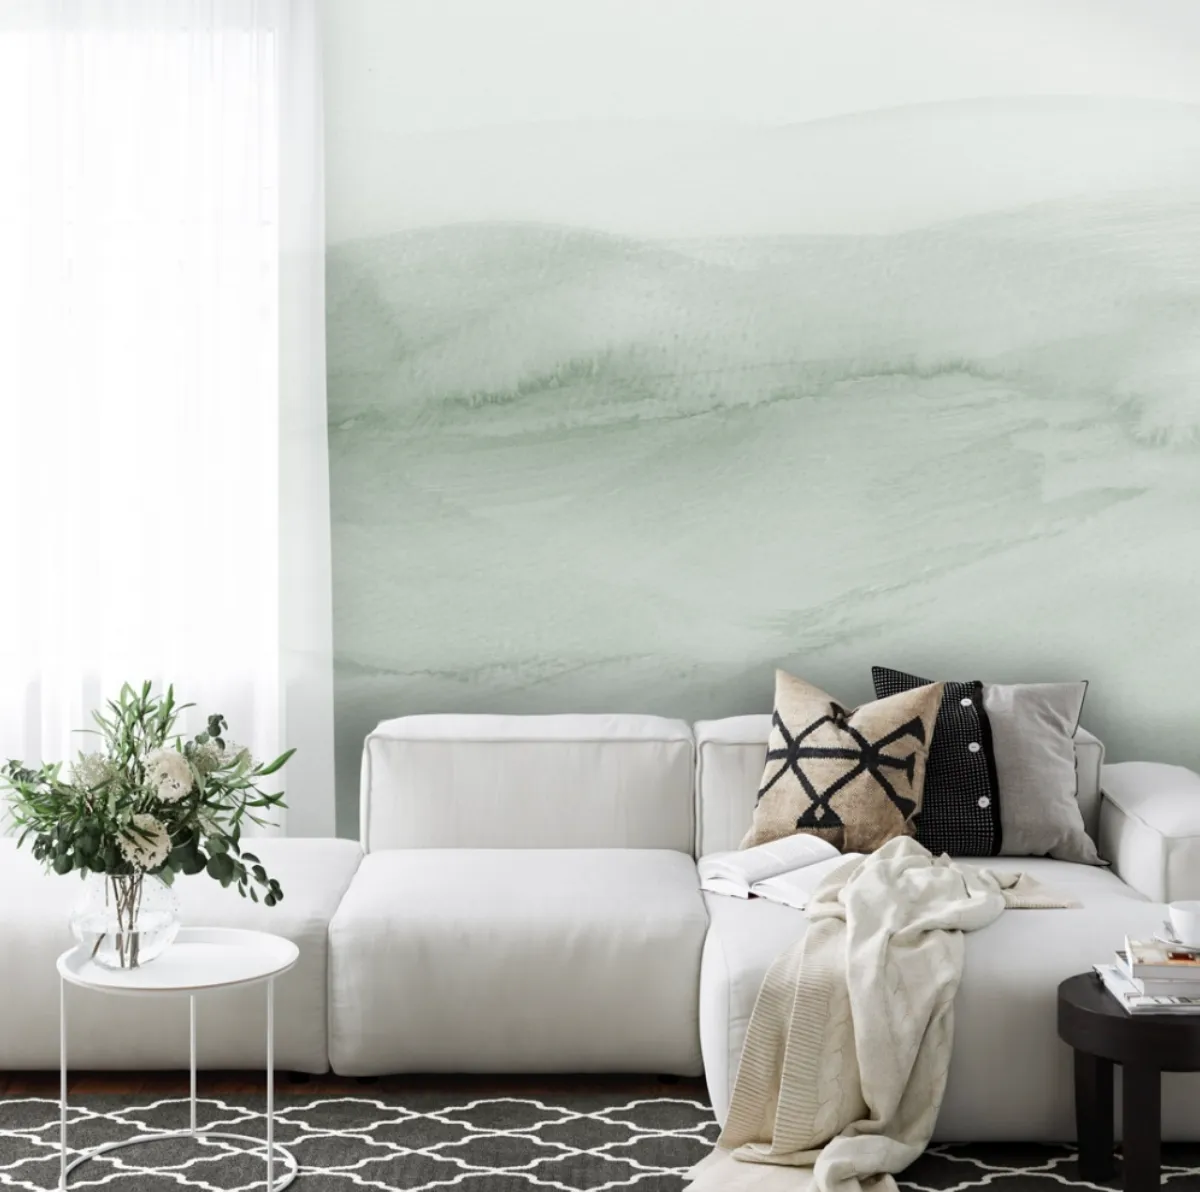 Watercolour Ombre mural in sage green